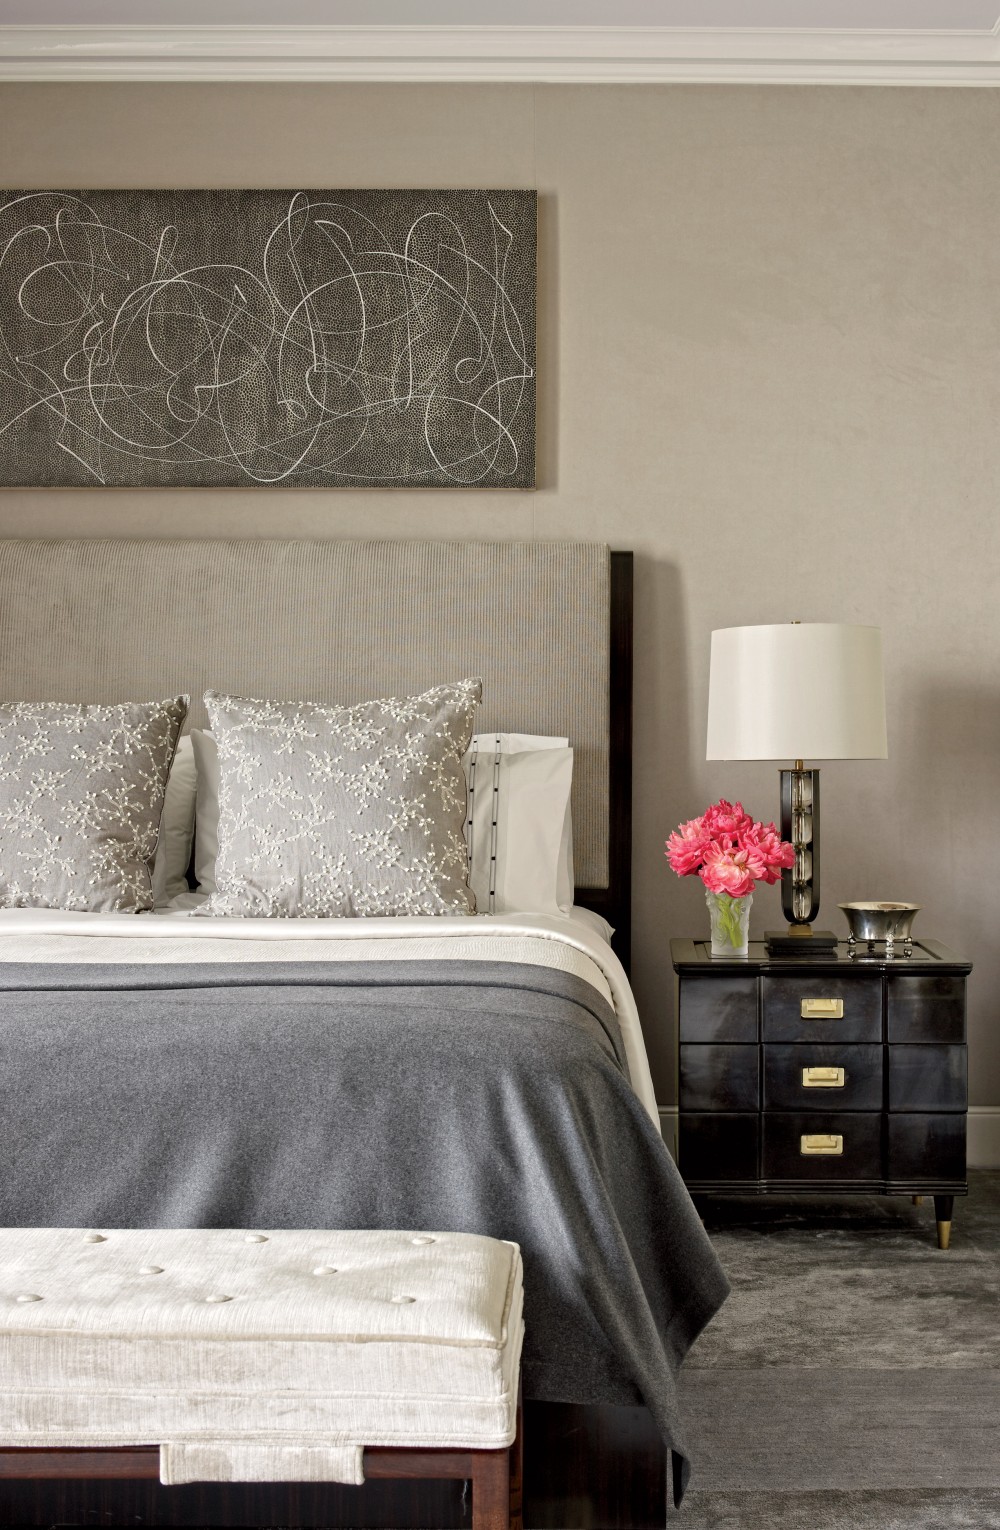 A Knoll Ultrasuede sheathes the master bedroom